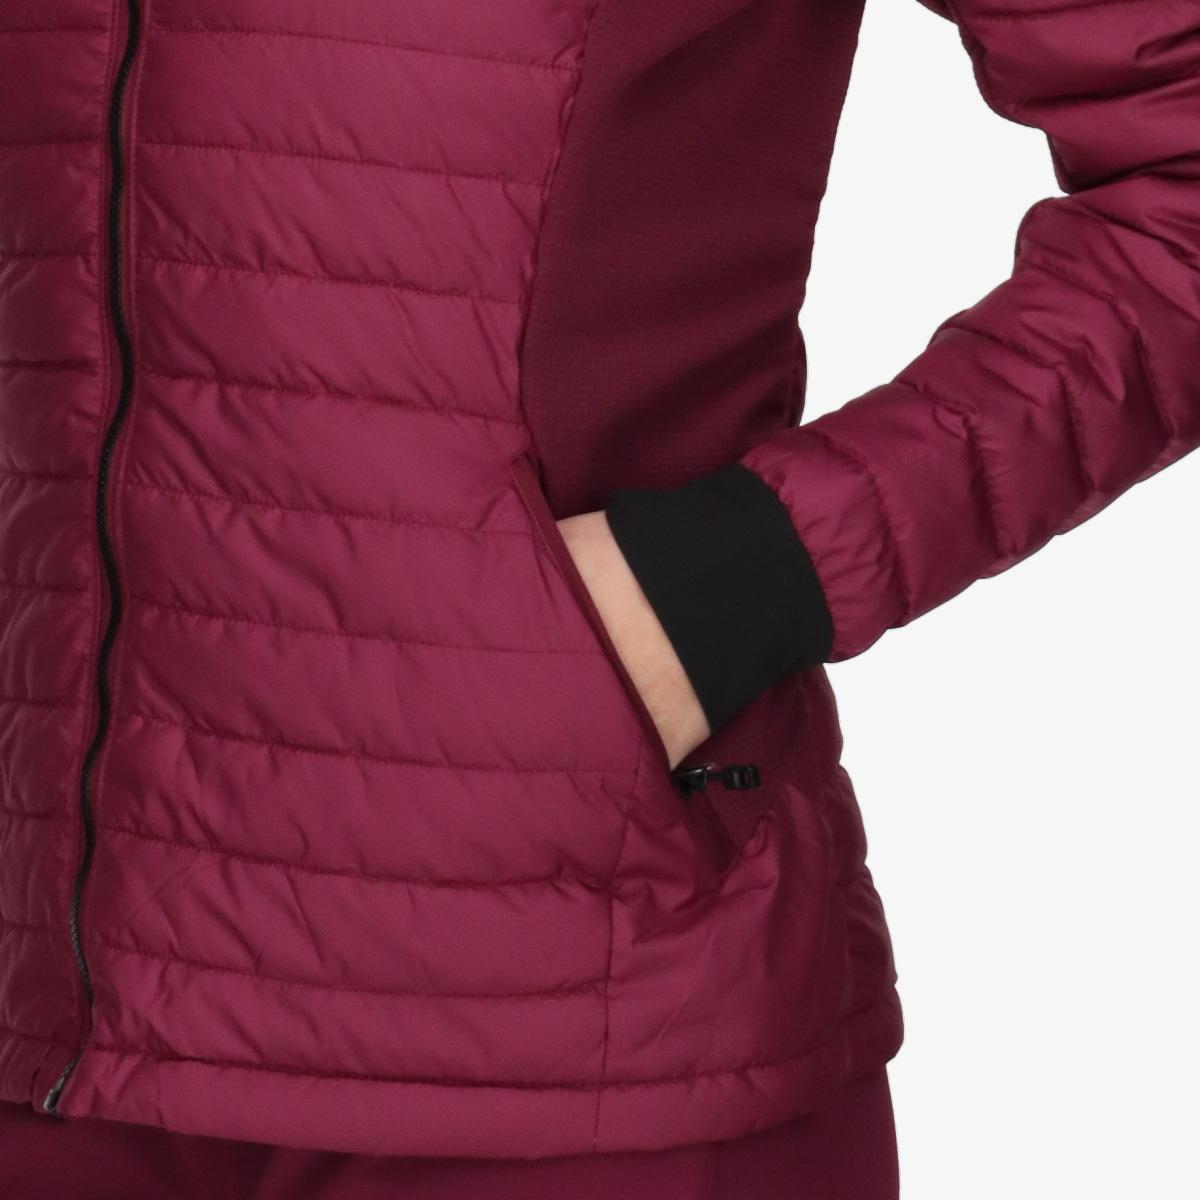 THE NORTH FACE WOMEN’S INSULATION HYBRID 